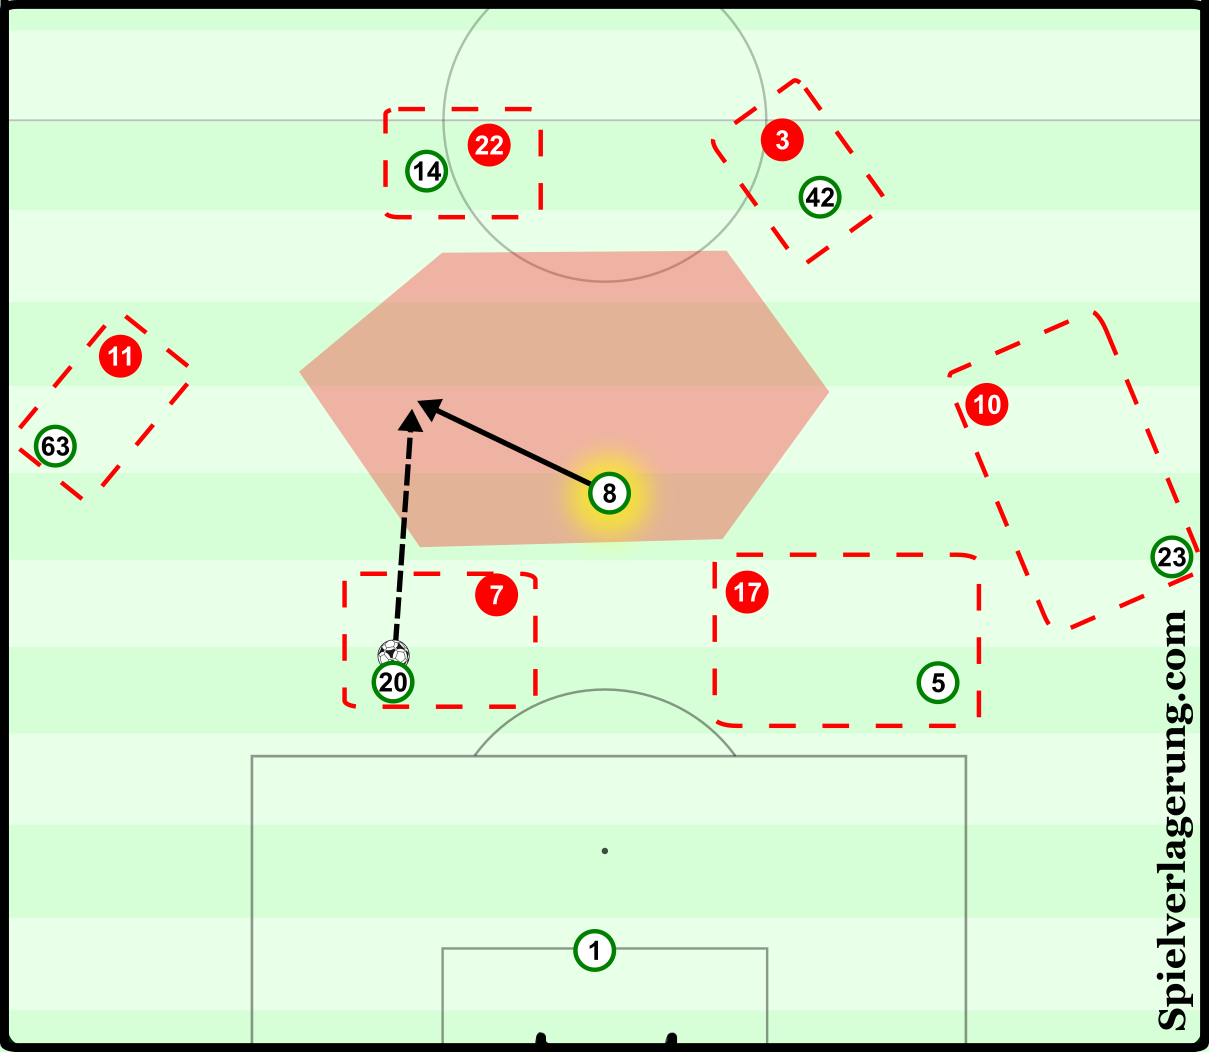 Aberdeen's initial pressing of the Celtic back line was easily broken, as Brown was left free by the spacing of his teammates to receive centrally. He is in such space that Boyata can pass into space to avoid the cover shadow of McLean.